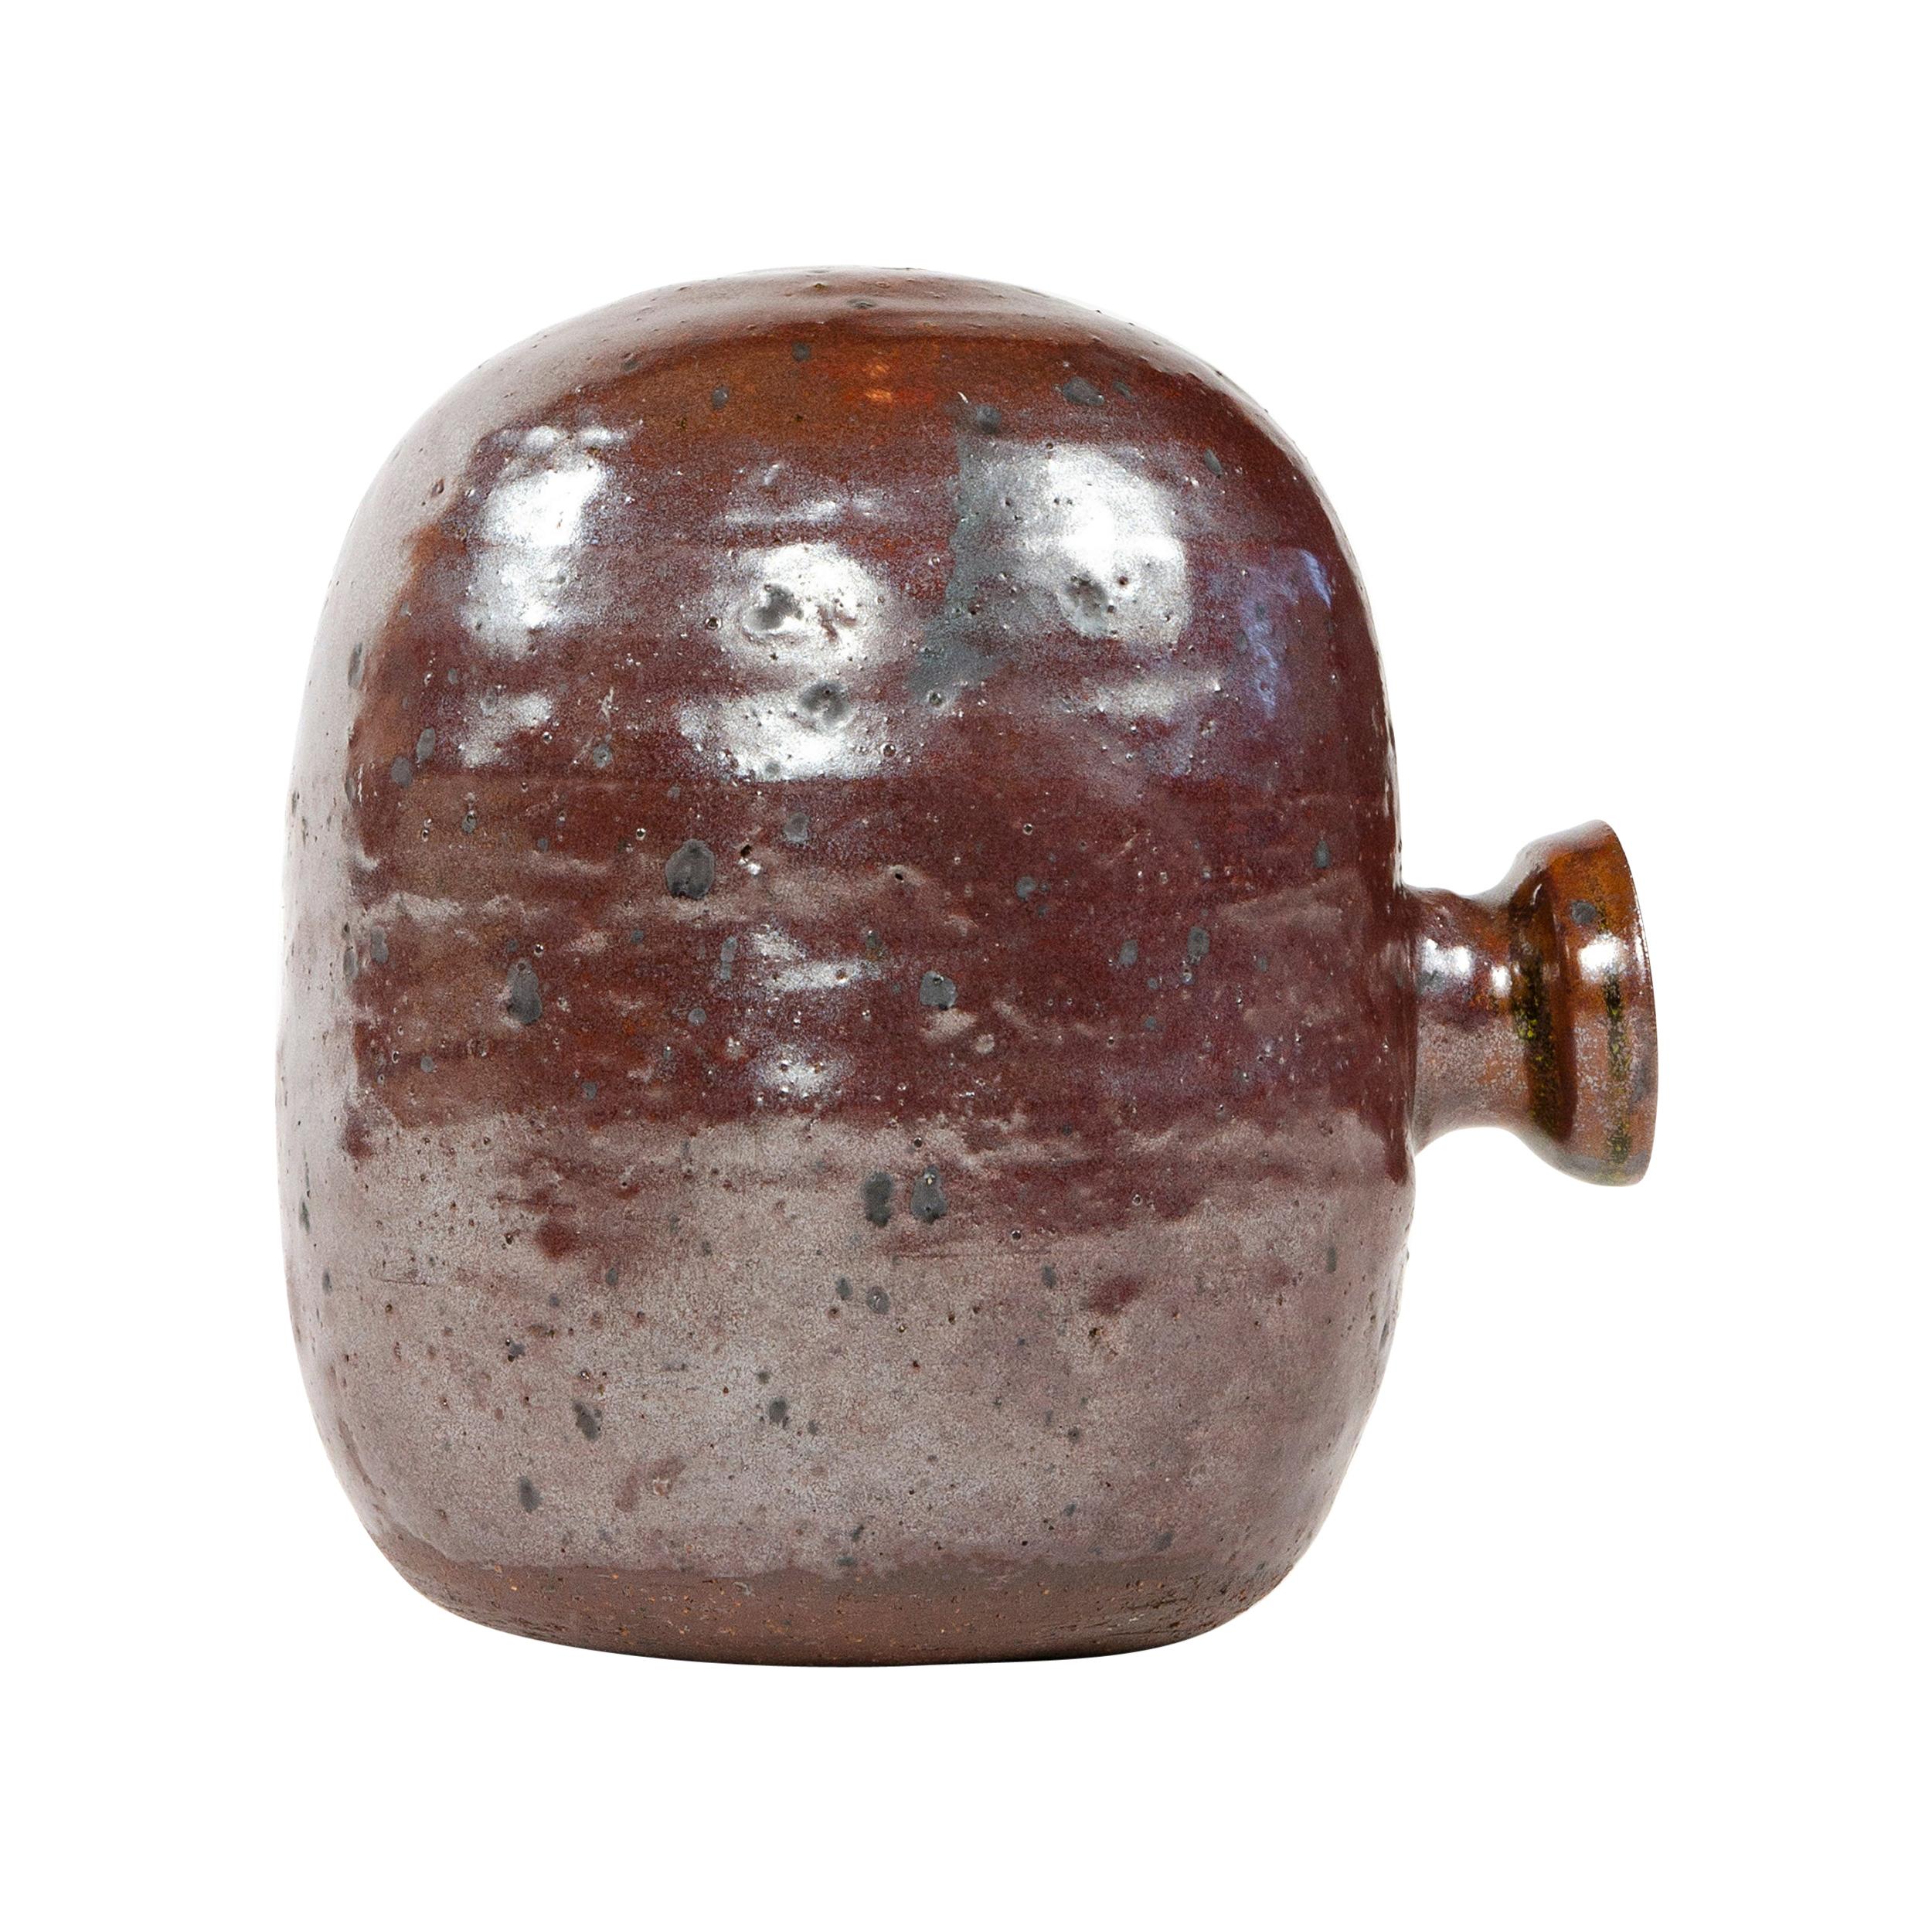 1950s Japanese Ceramic Vase with Side Spout